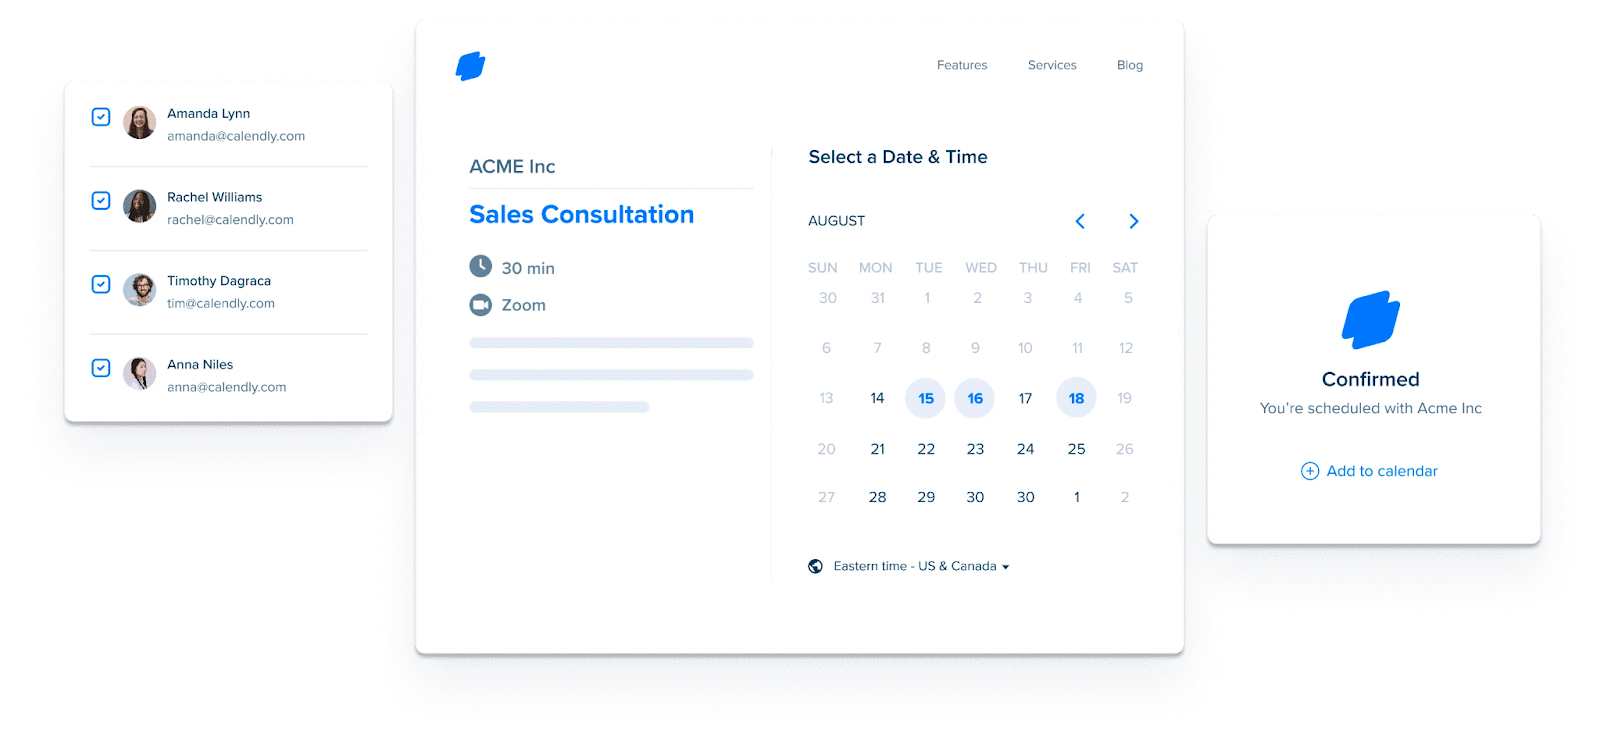 Calendly features